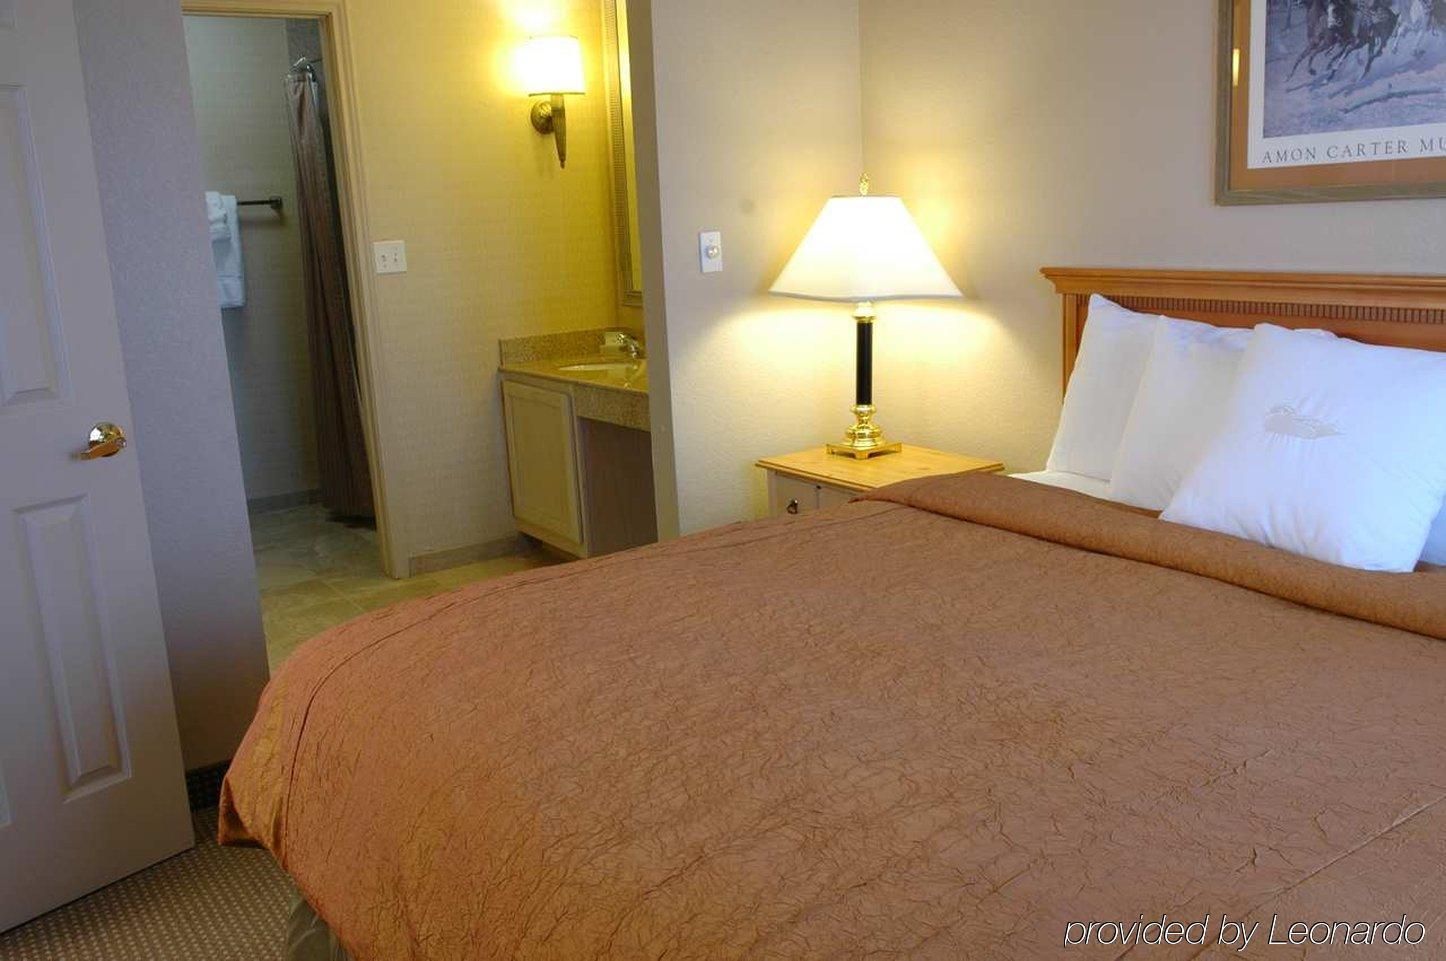 Homewood Suites By Hilton Ft. Worth-Bedford Room photo